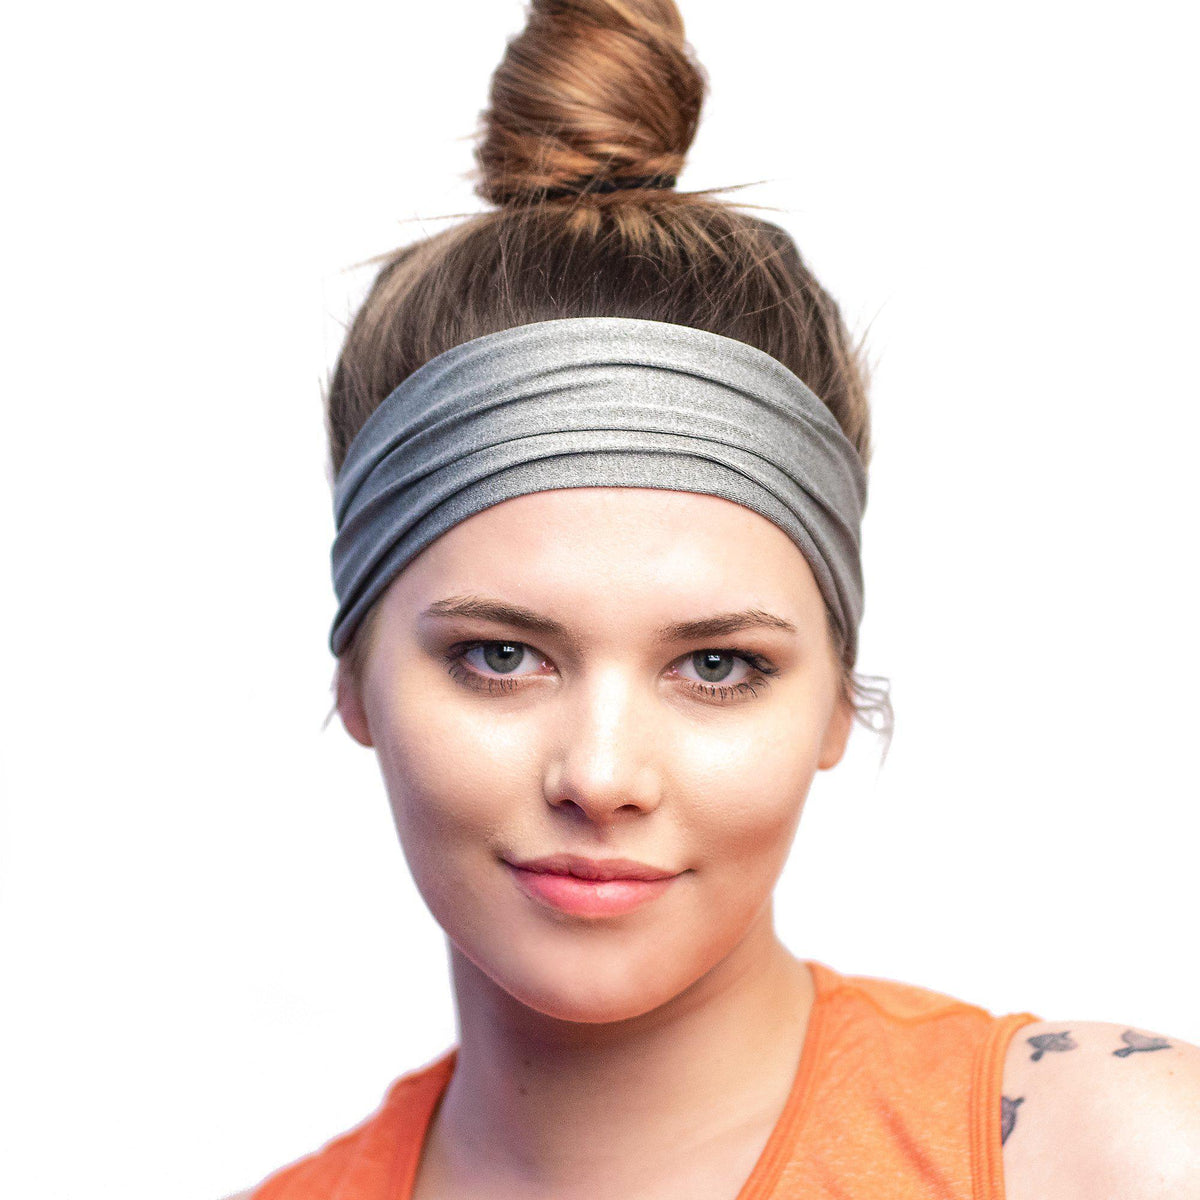 Lightweight Sports Headband - The Rosella Racer - Red Dust Active